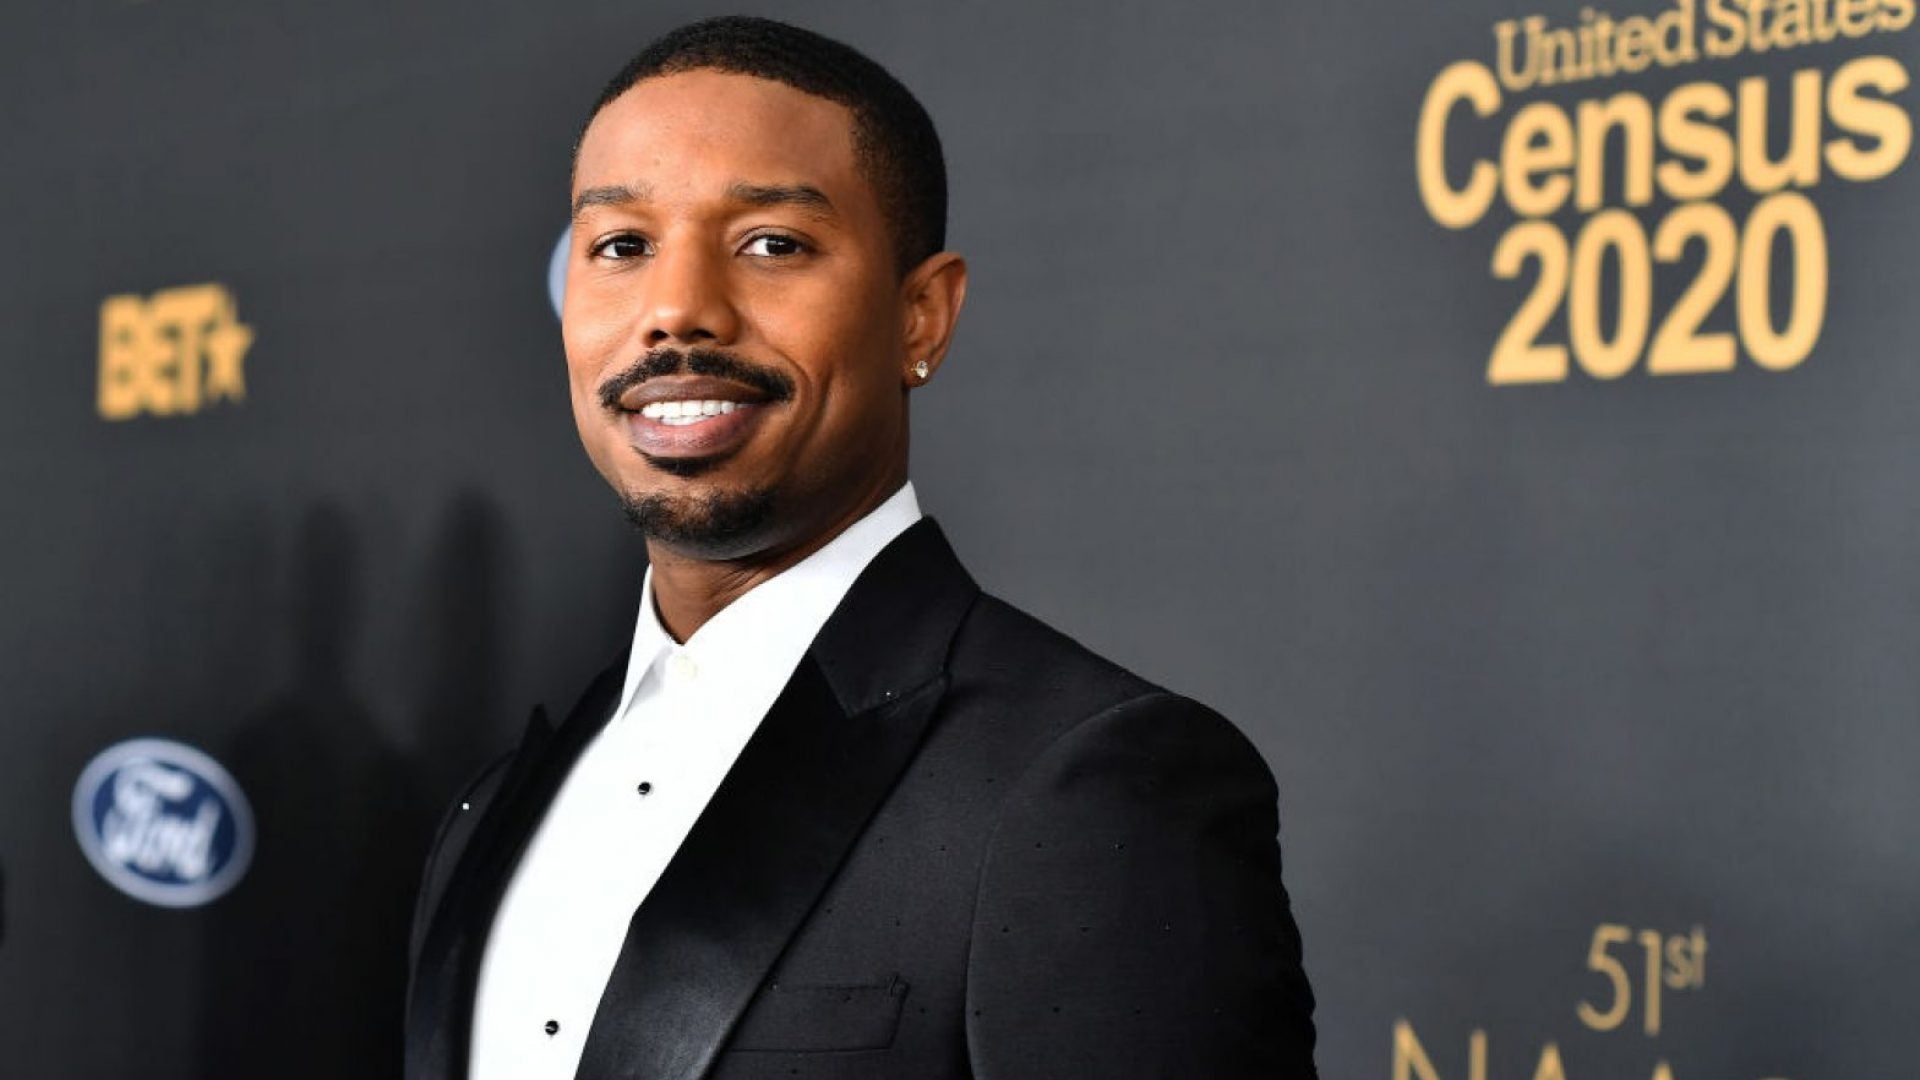 Being "Extremely Happy" Behind Michael B. Jordan's Decision To Make His Love For Lori Harvey Public